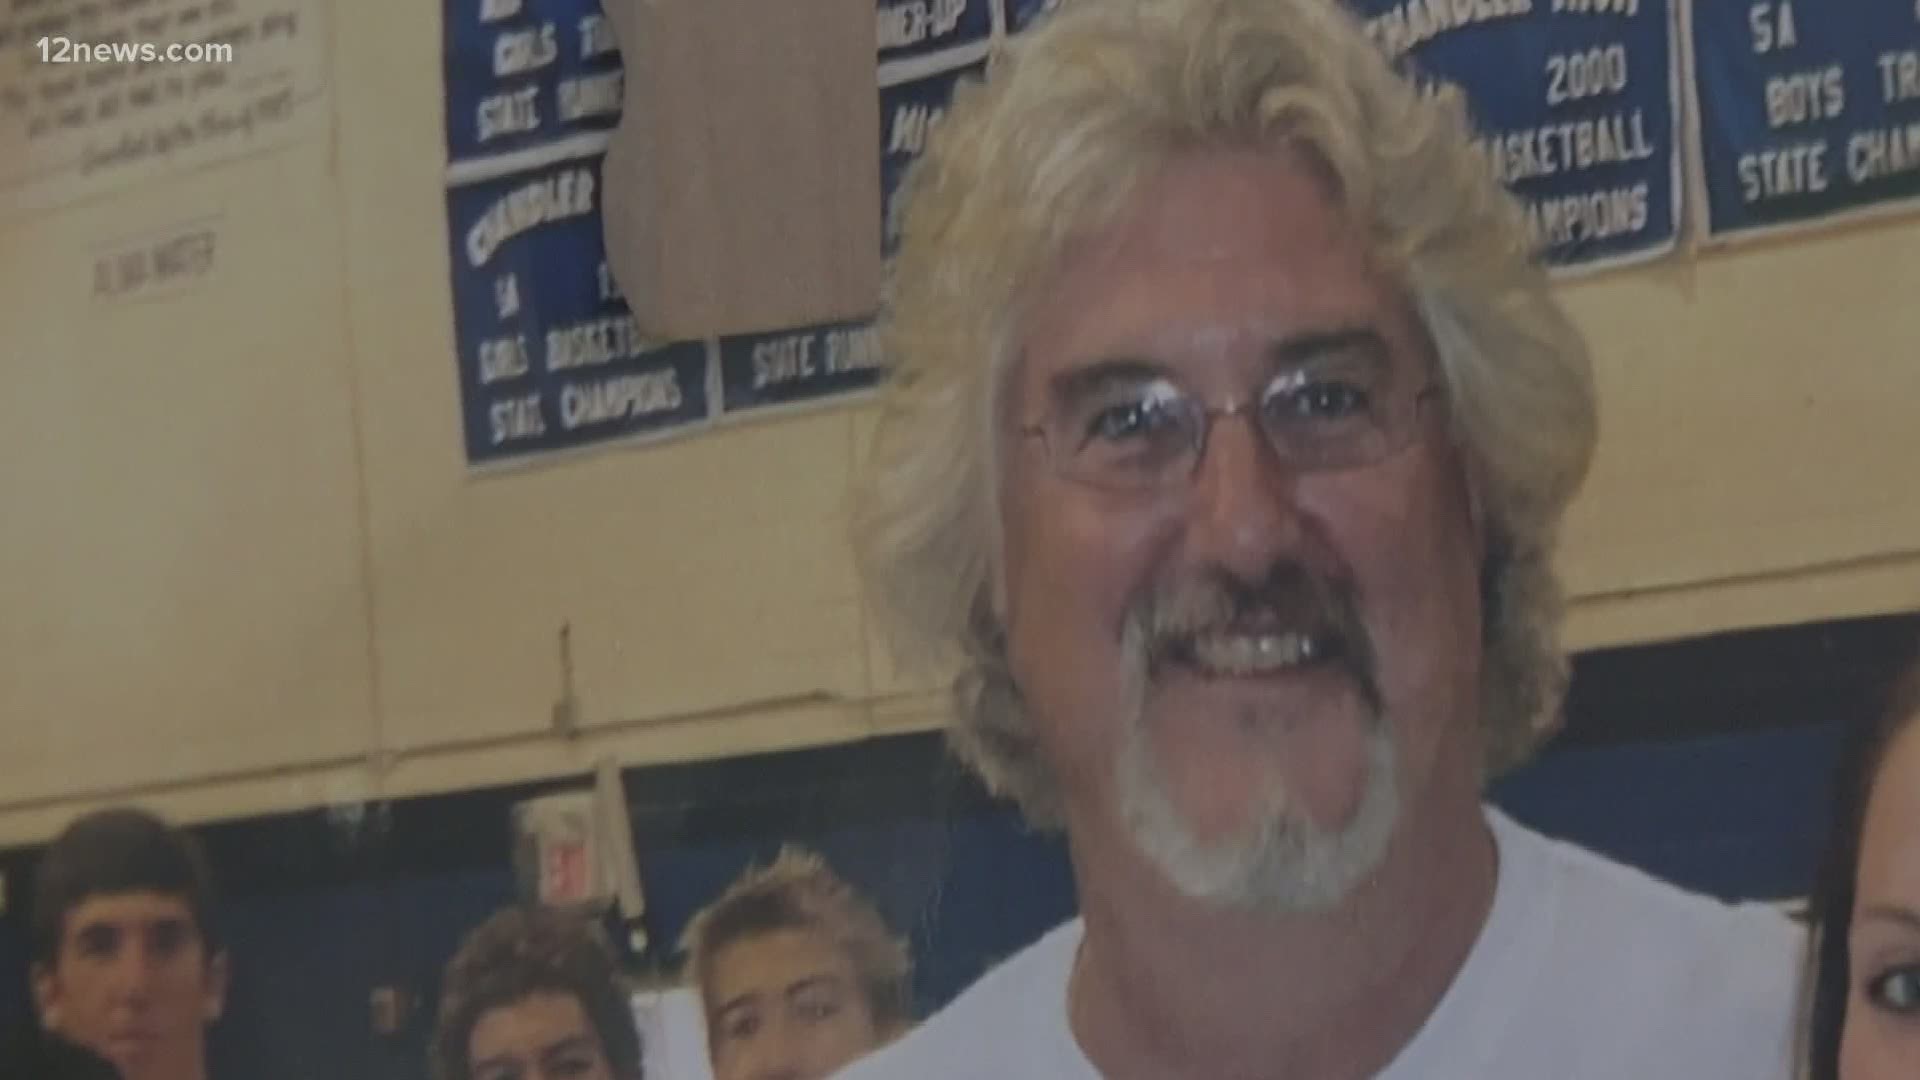 Kerry Croswhite was a beloved Chandler High School coach who was known for rescuing a student who nearly drowned.